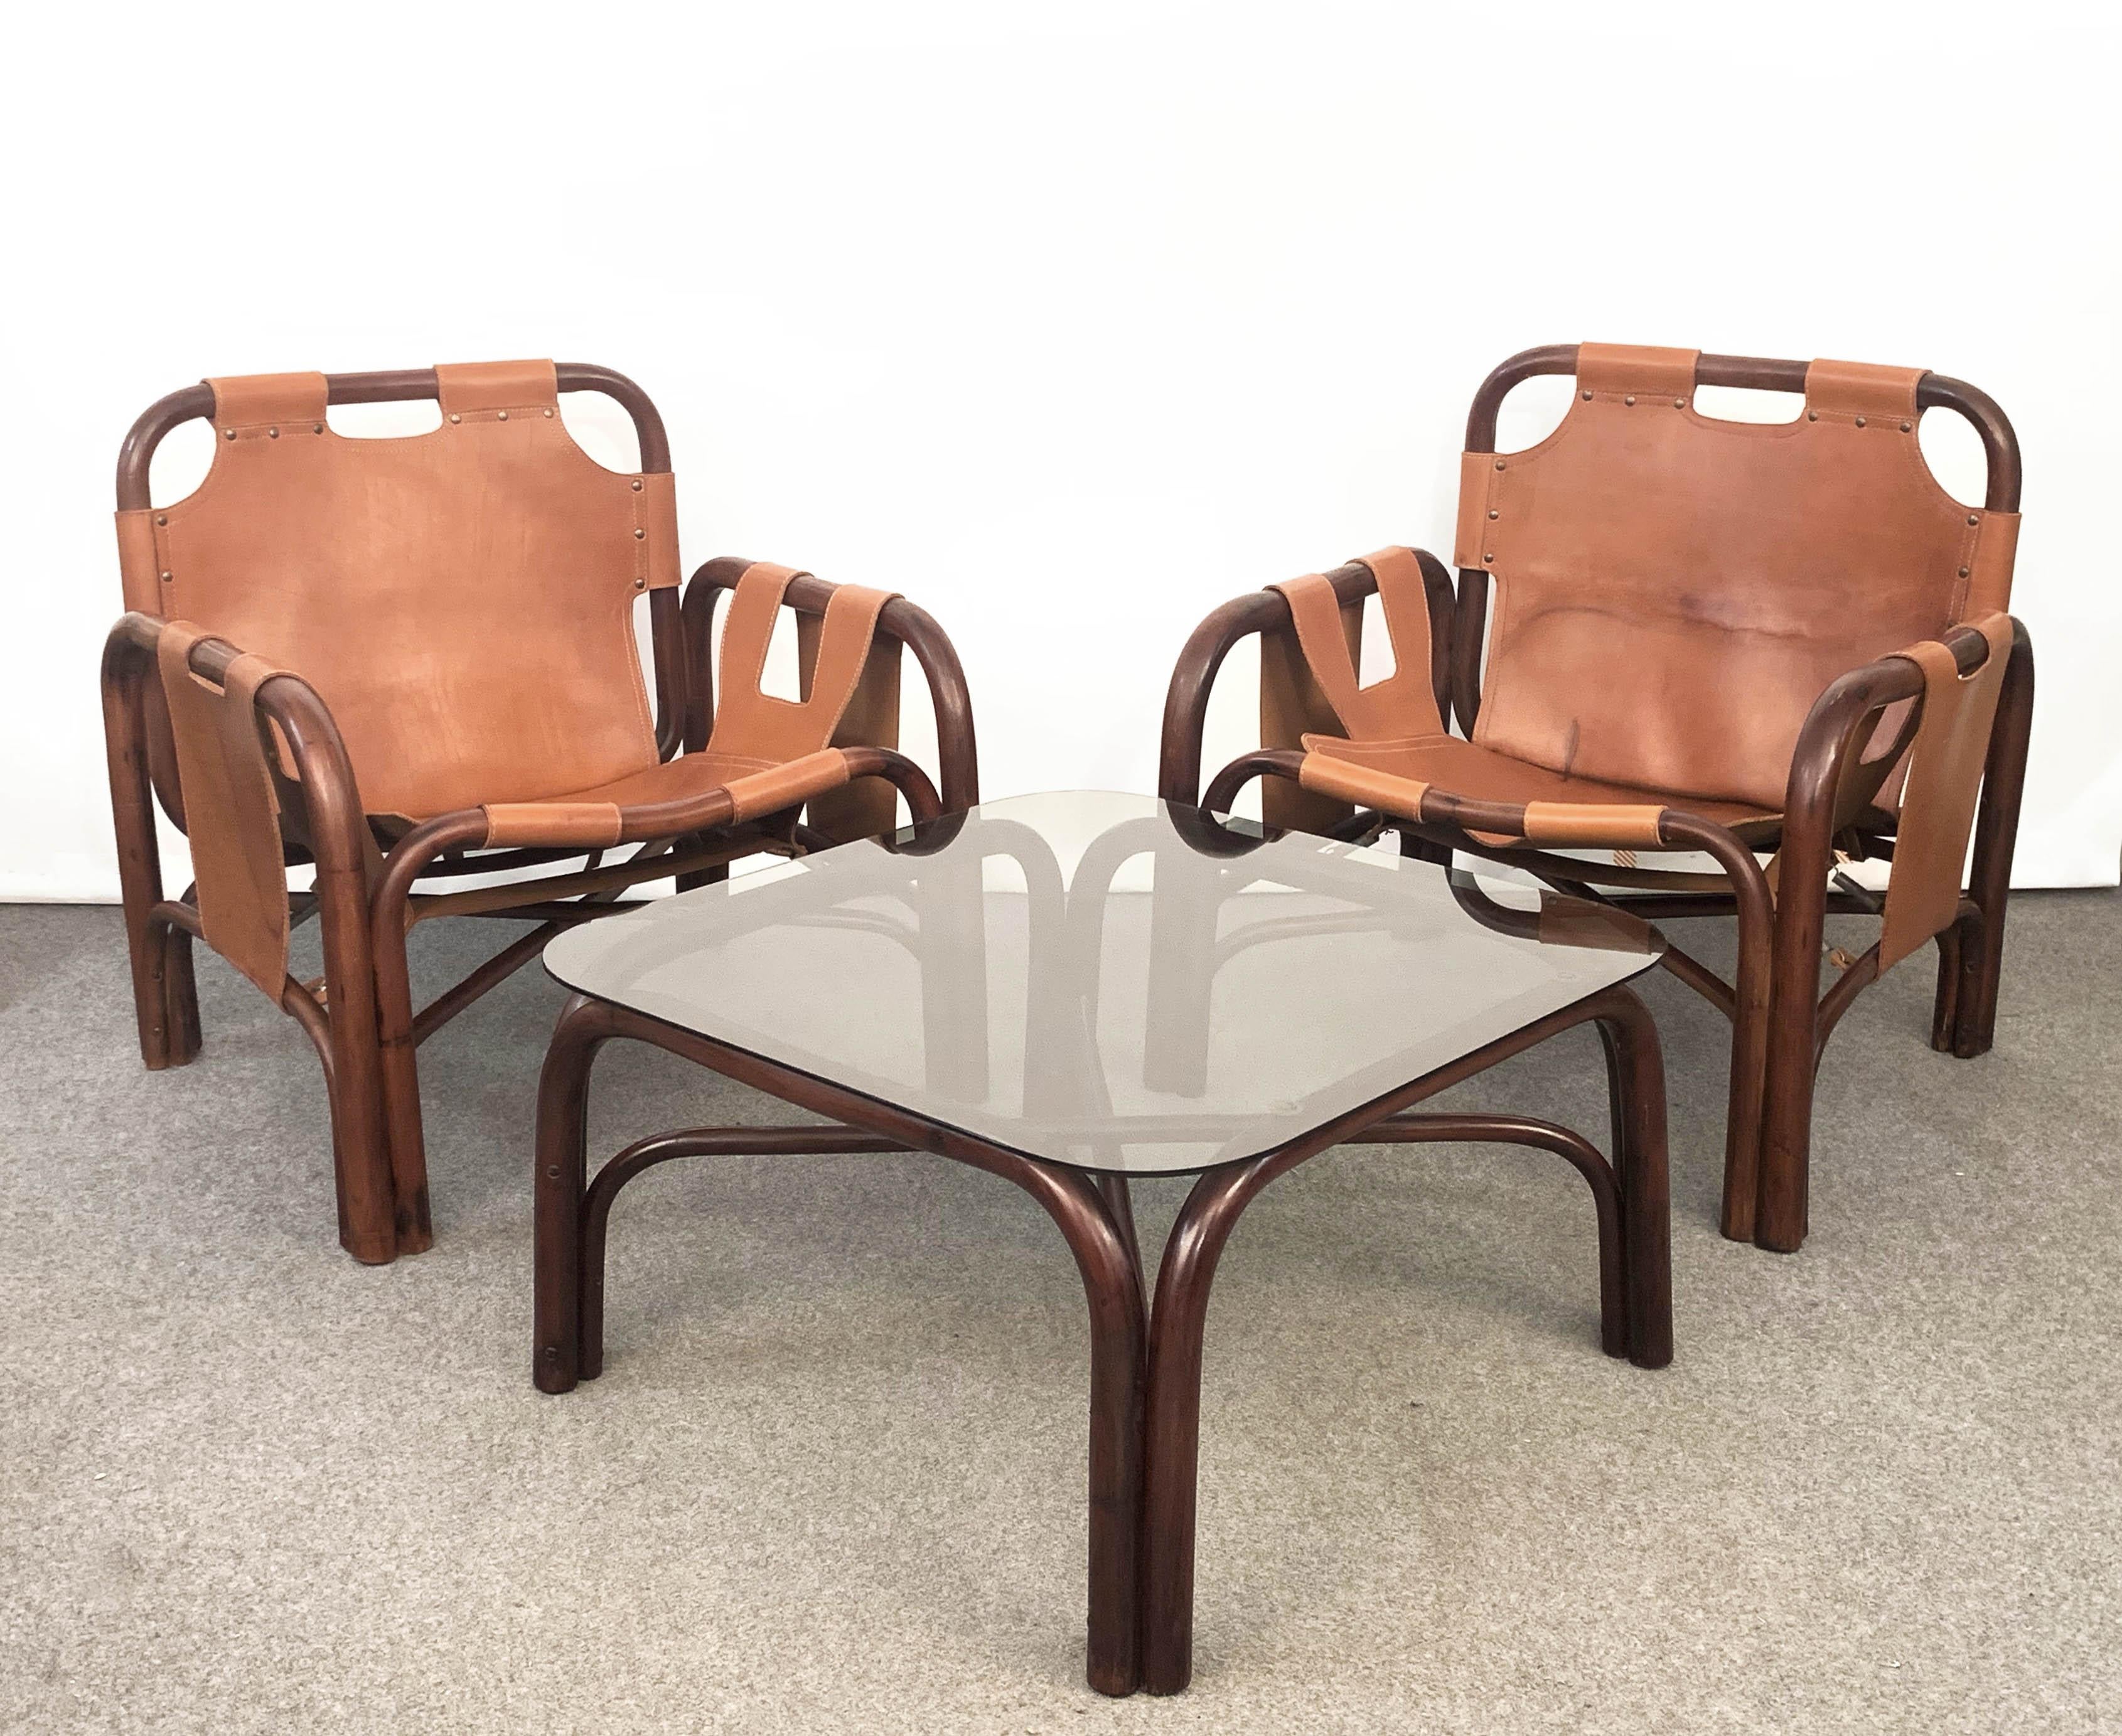 By Tito Agnoli for Bonacina, Italy, 1960. Set of two armchairs and coffee table, bamboo, leather. Bamboo table with smoked glass. In good condition.
The leather has been replaced and is exactly the same as the original.